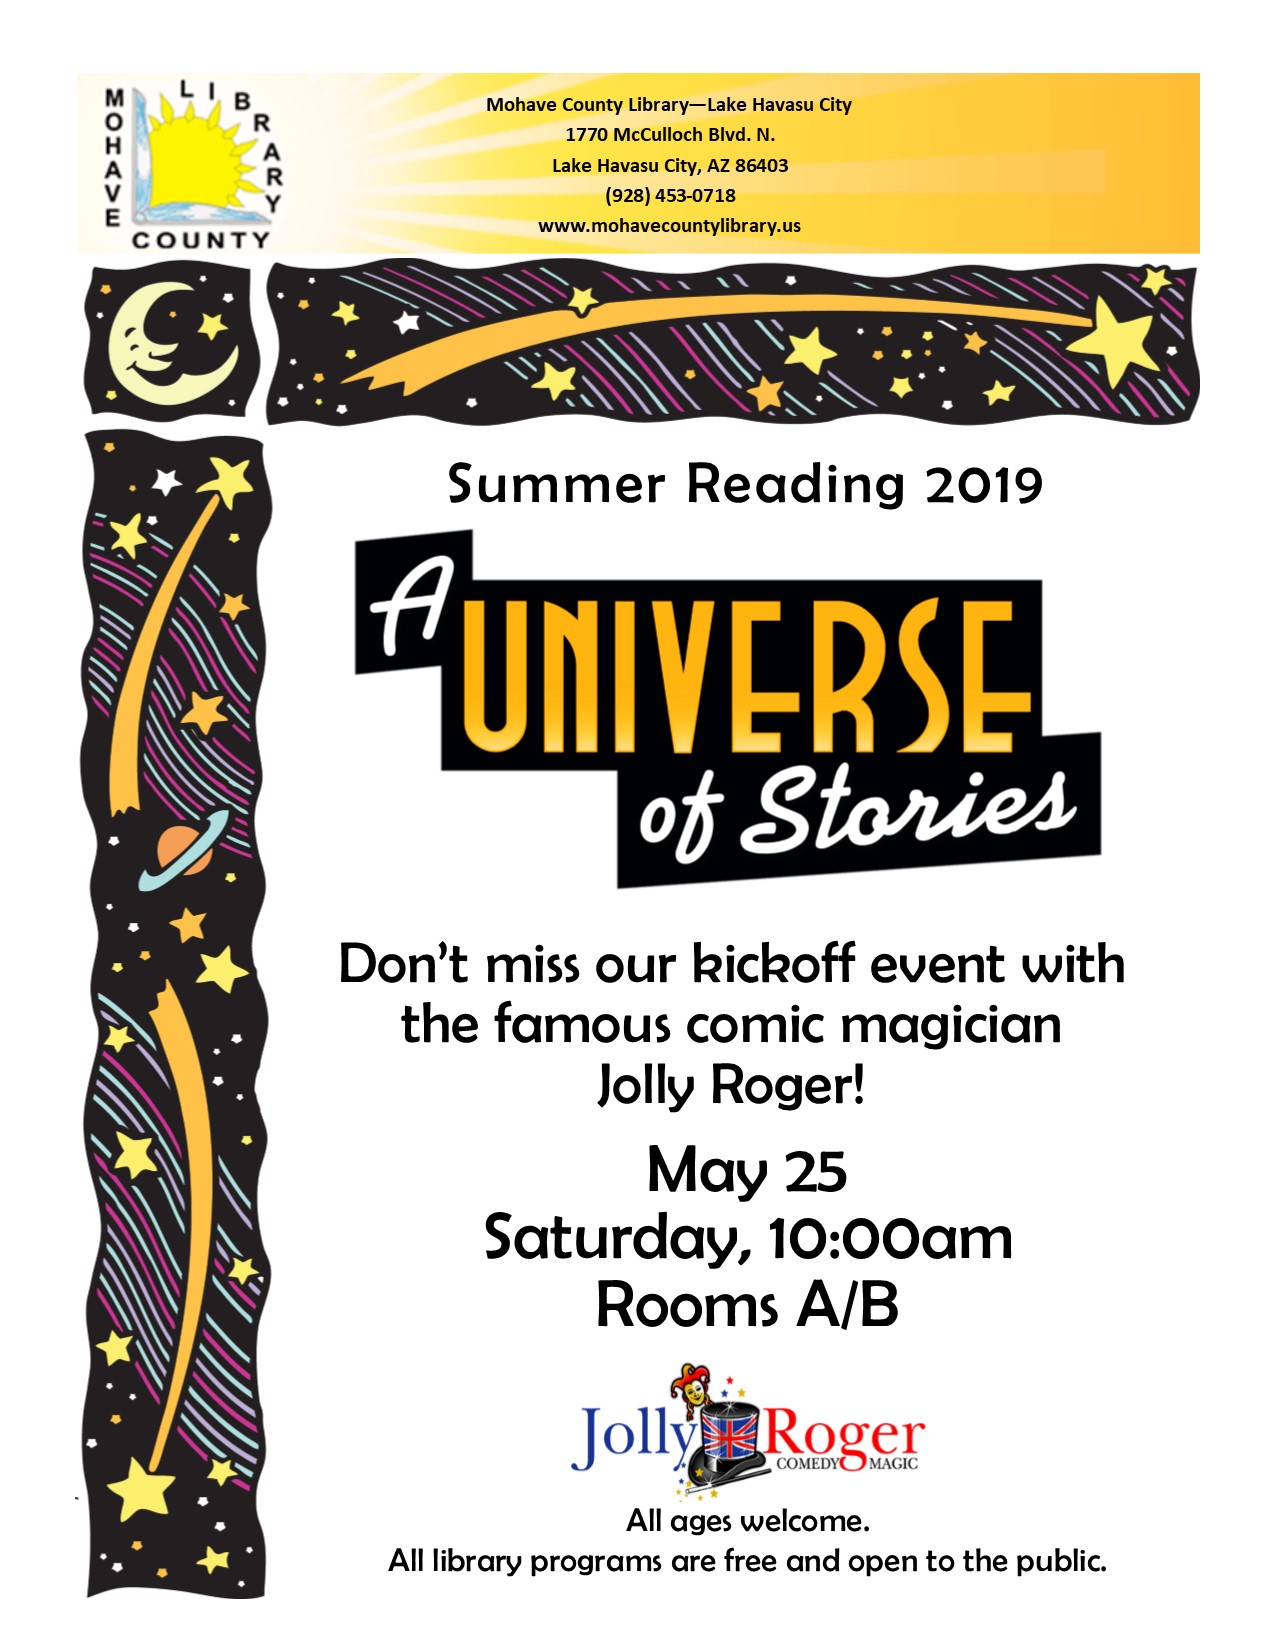 Summer Reading 2019: A Universe of Stories